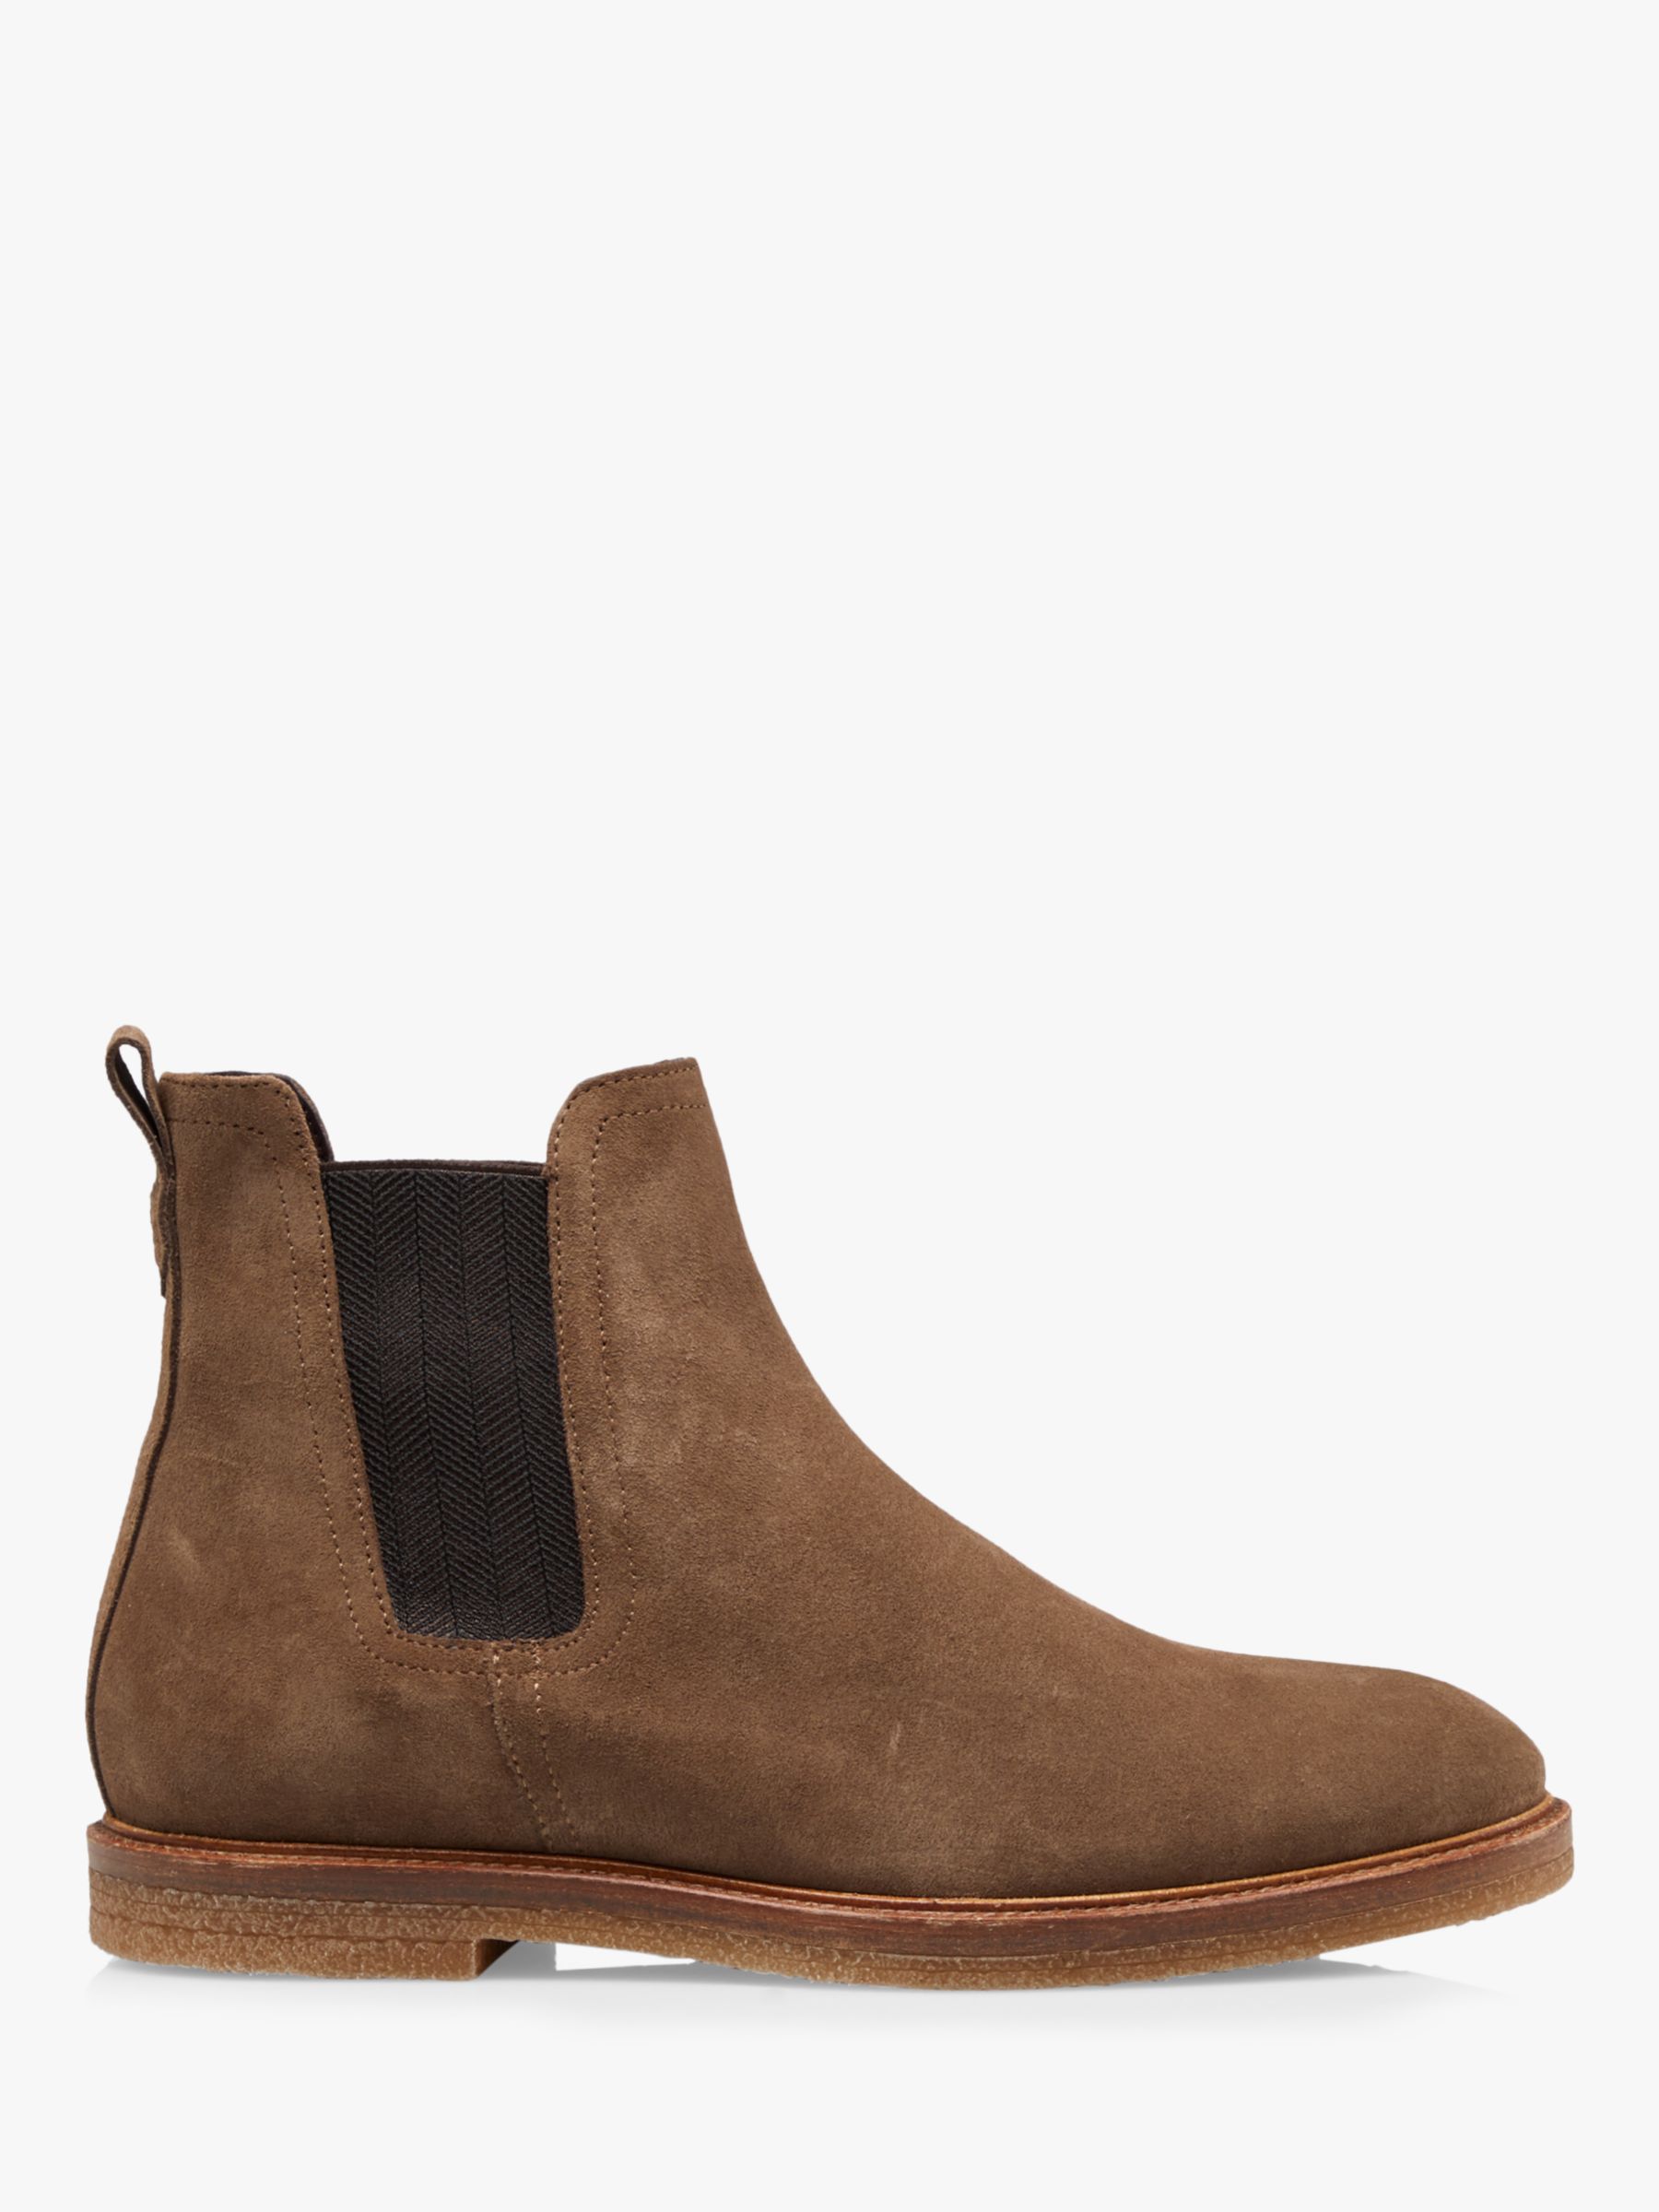 Dune Cogent Suede Desert Chelsea Boots, Taupe at John Lewis & Partners